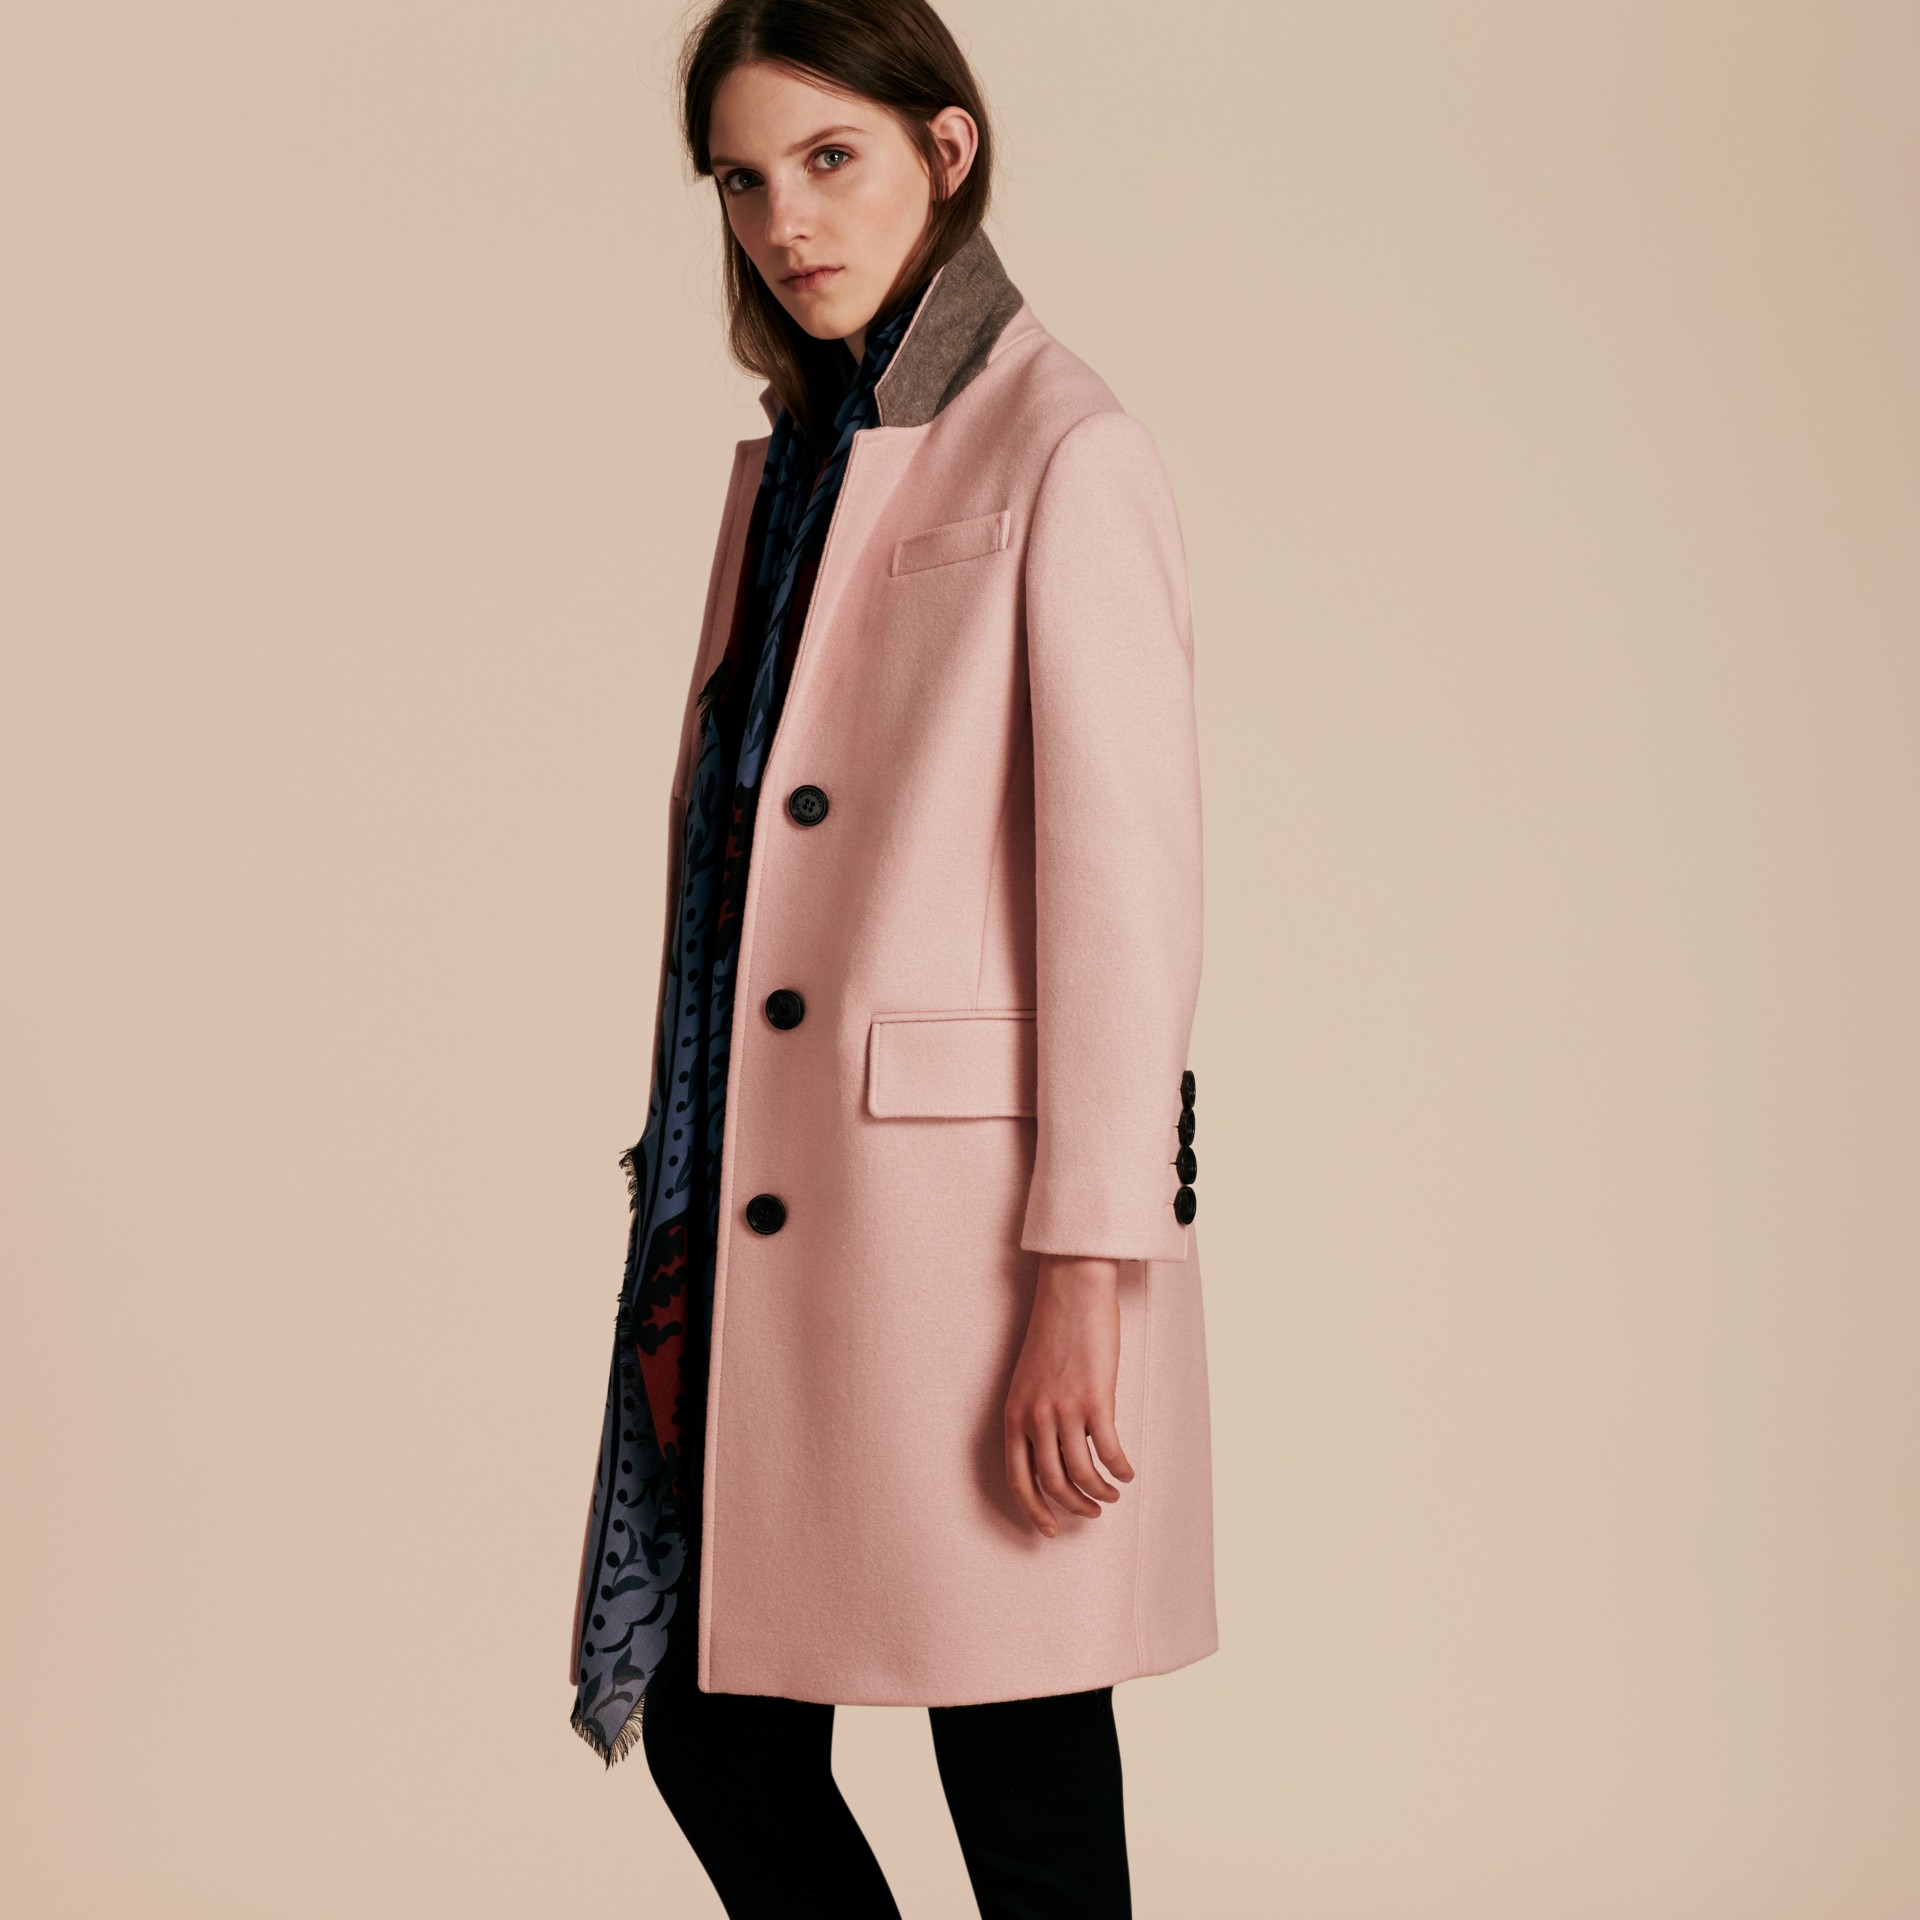 Boiled Wool Tailored Coat in Chalk Pink - Women | Burberry United Kingdom